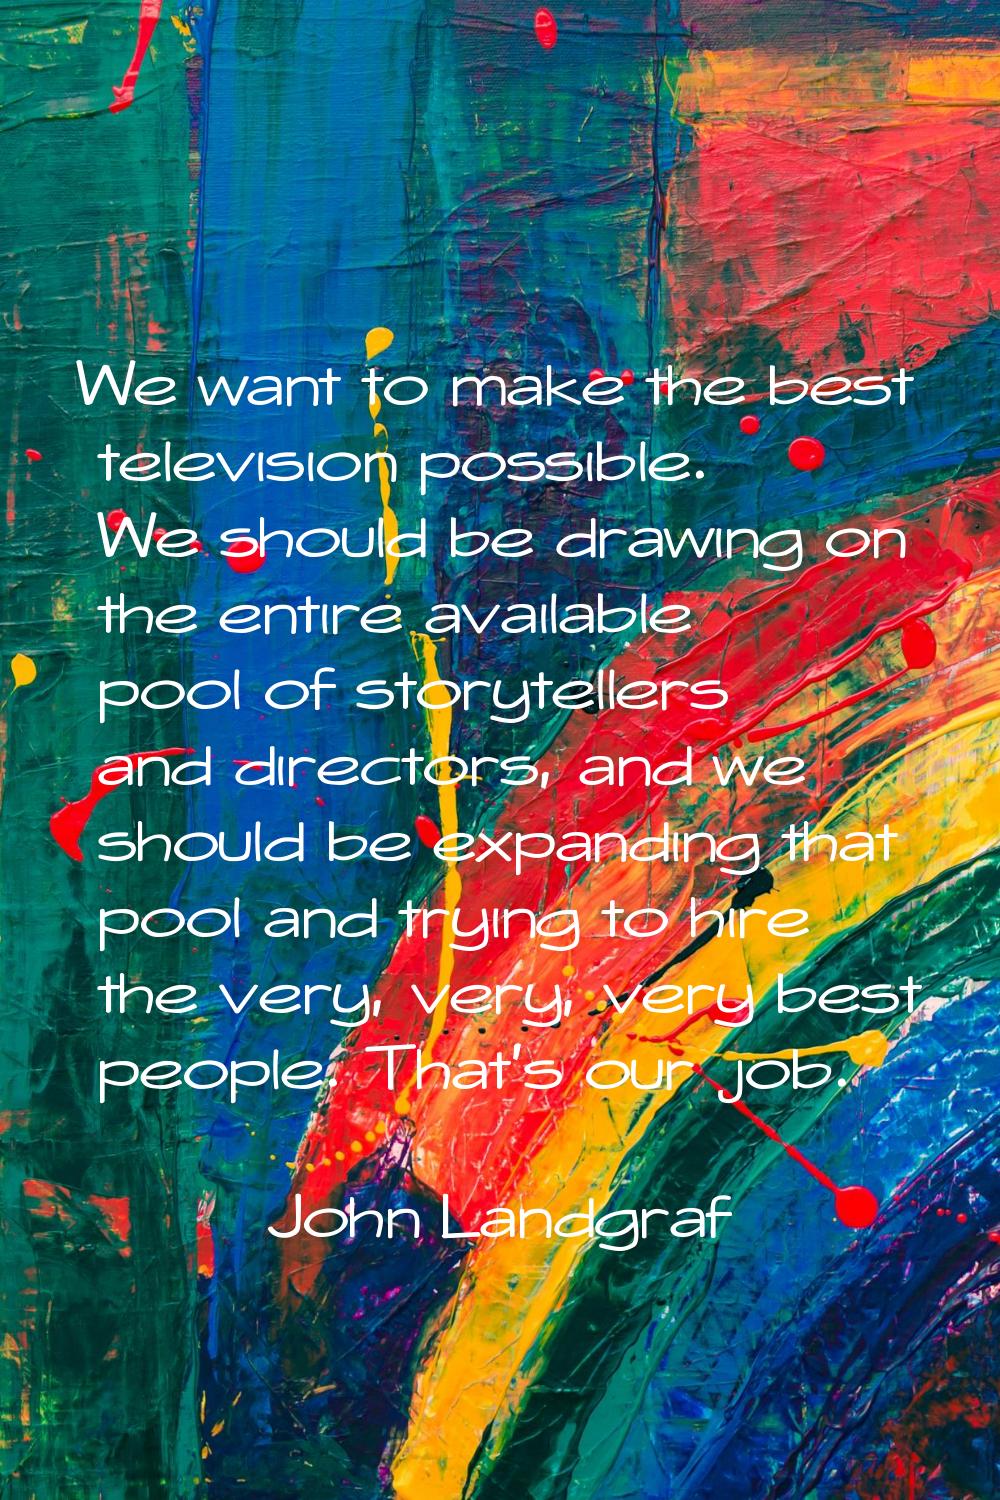 We want to make the best television possible. We should be drawing on the entire available pool of 